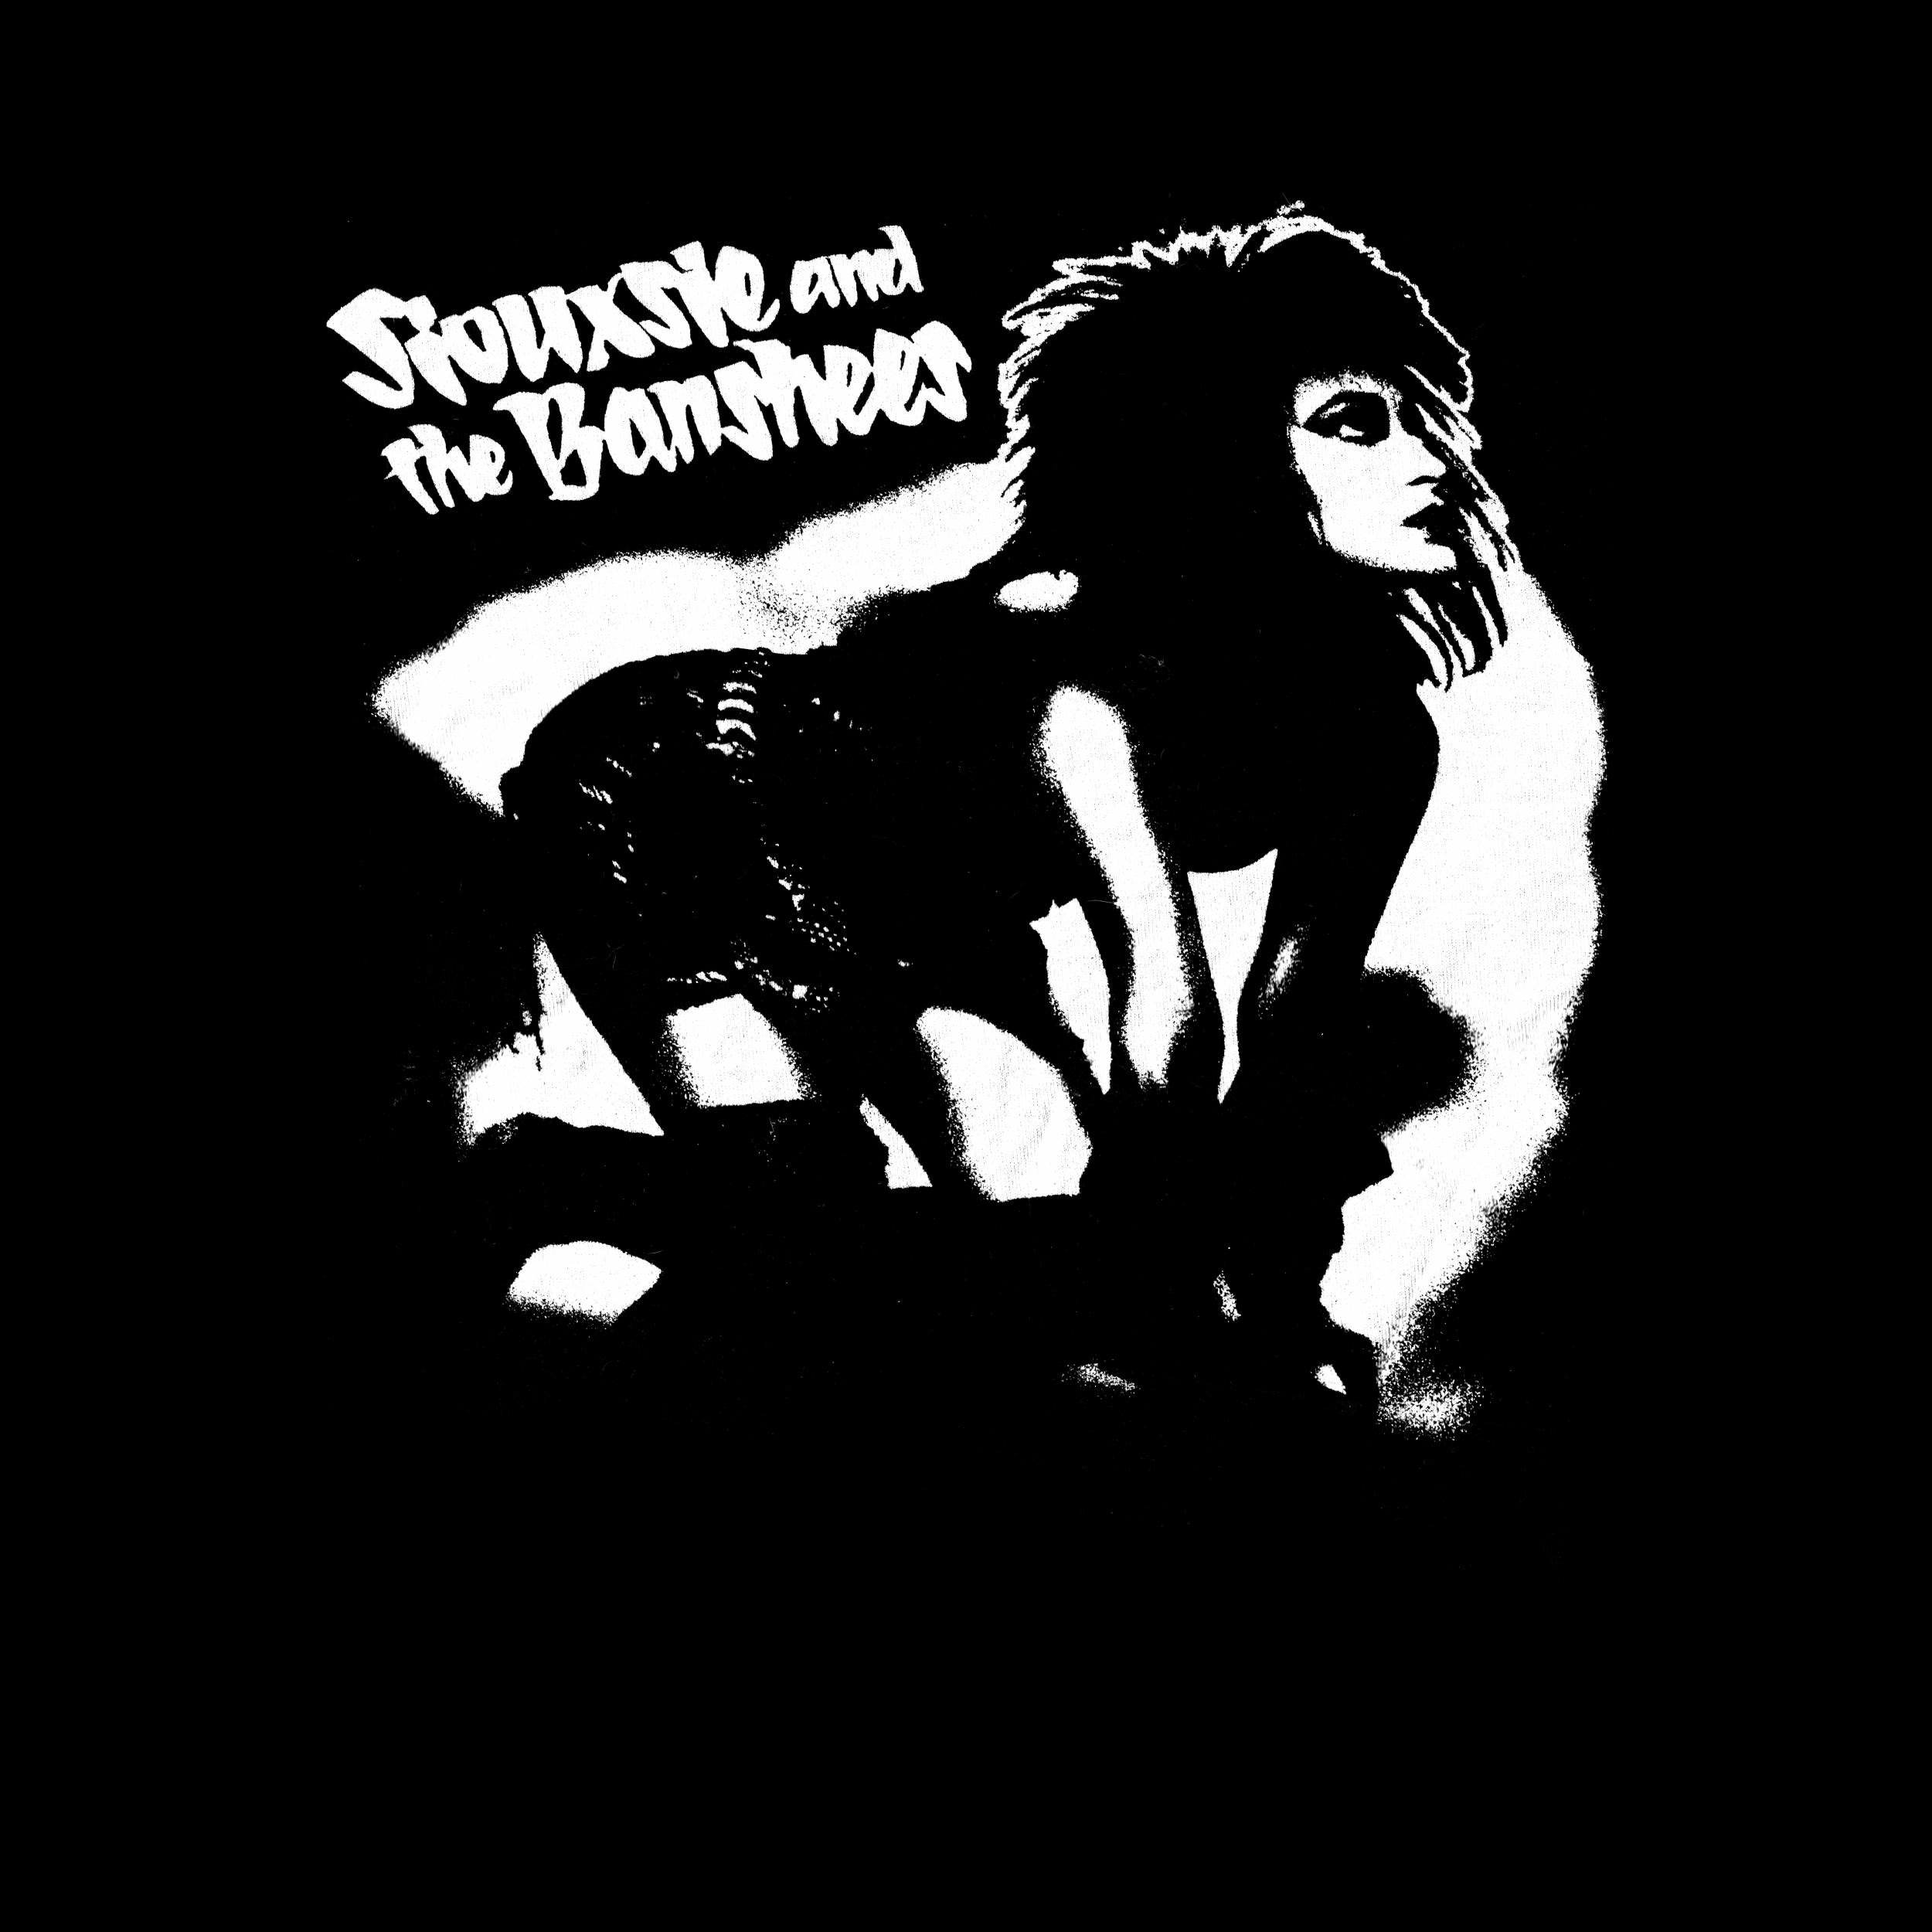 Siouxsie And The Banshees Classic Tee